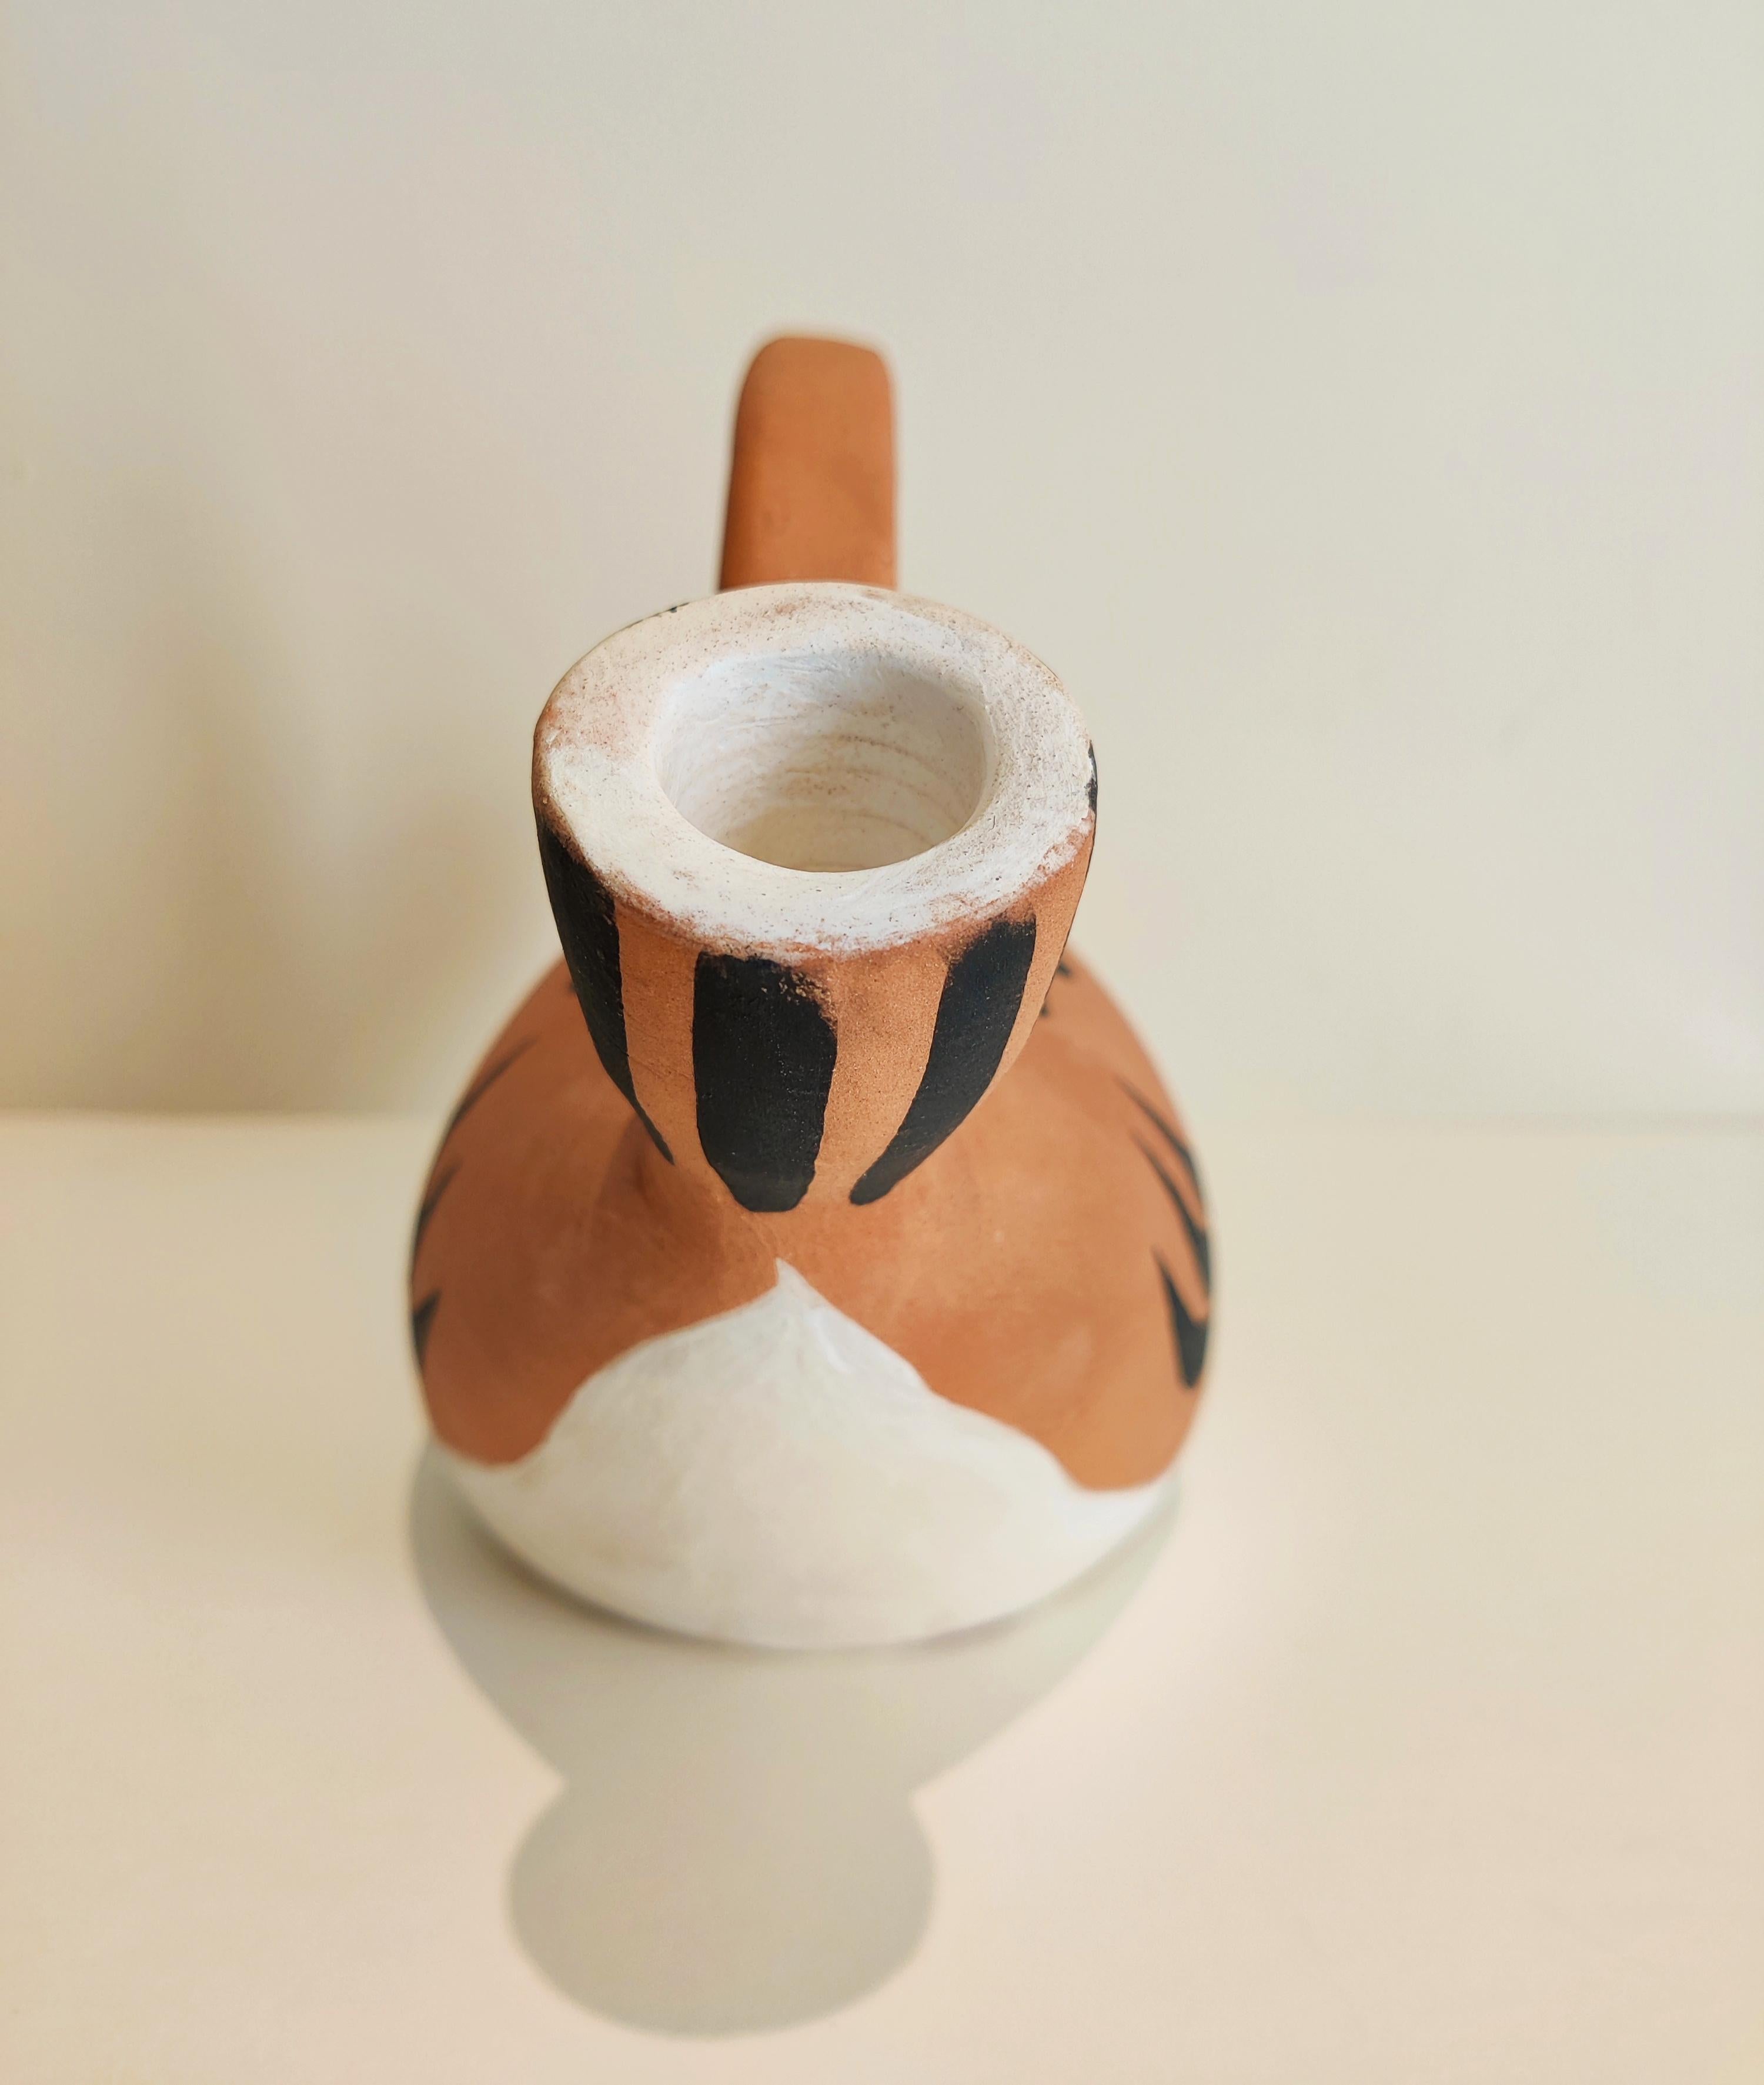 Pablo Picasso
Fish Subject (Sujet poisson), 1952
Ceramic pitcher, made of red earthenware clay, partially glazed and painted in black and white. 
Size 14 x 23 cm
Edition:	From the edition of 500.
Inscribed 'Edition Picasso Madoura' and with the